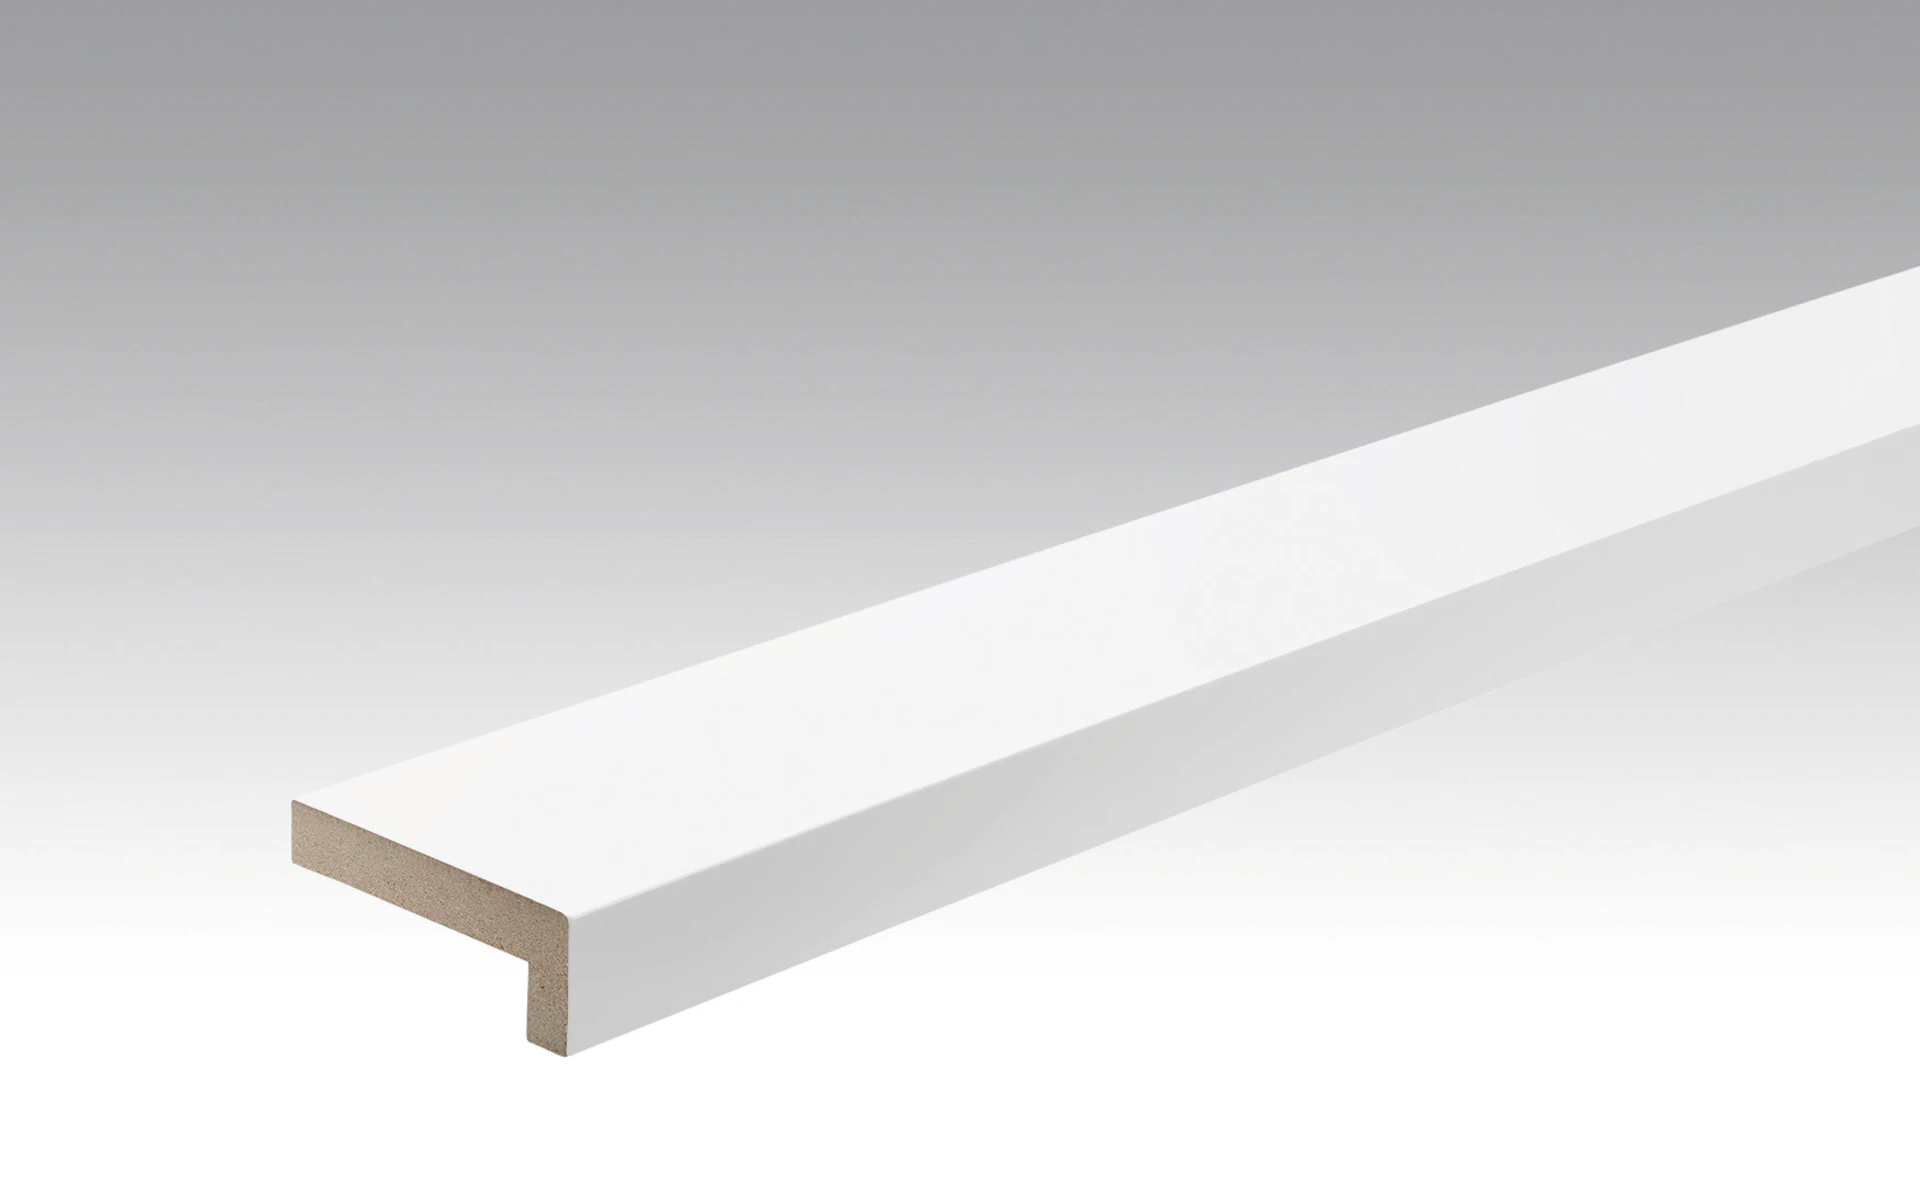 MEISTER Skirtings Angle cover strips Uni white glossy DF 324 - 2380 x 60 x 22 mm (200028-2380-00324)